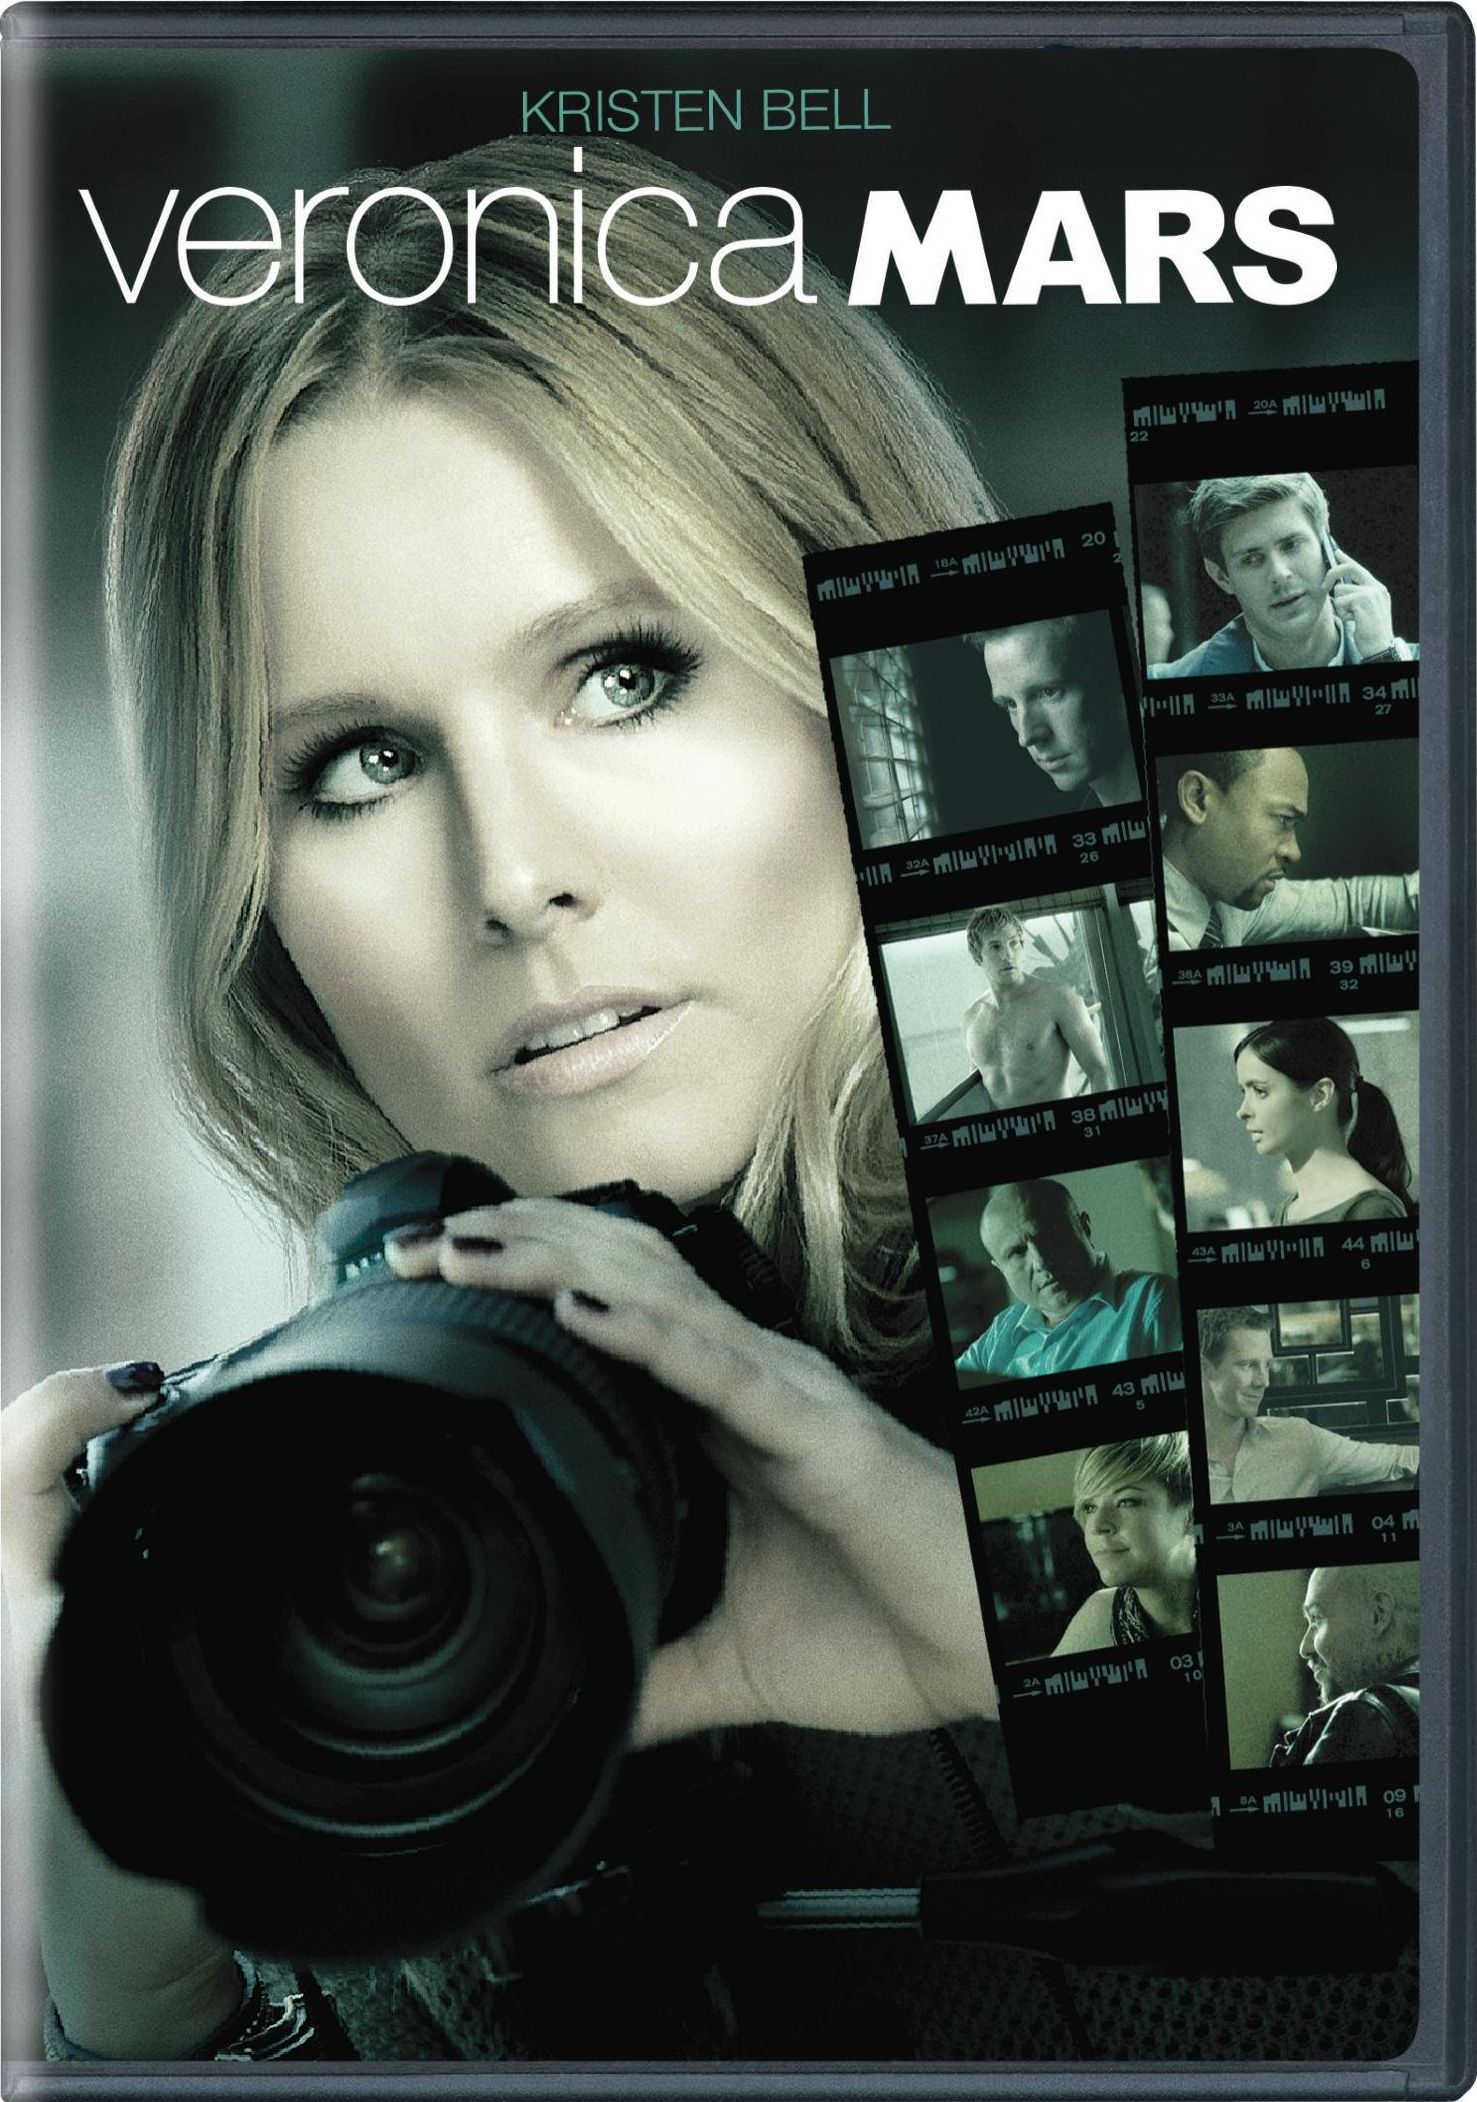 Veronica Mars Movie Review (2015) - Rating, Cast & Crew With Synopsis